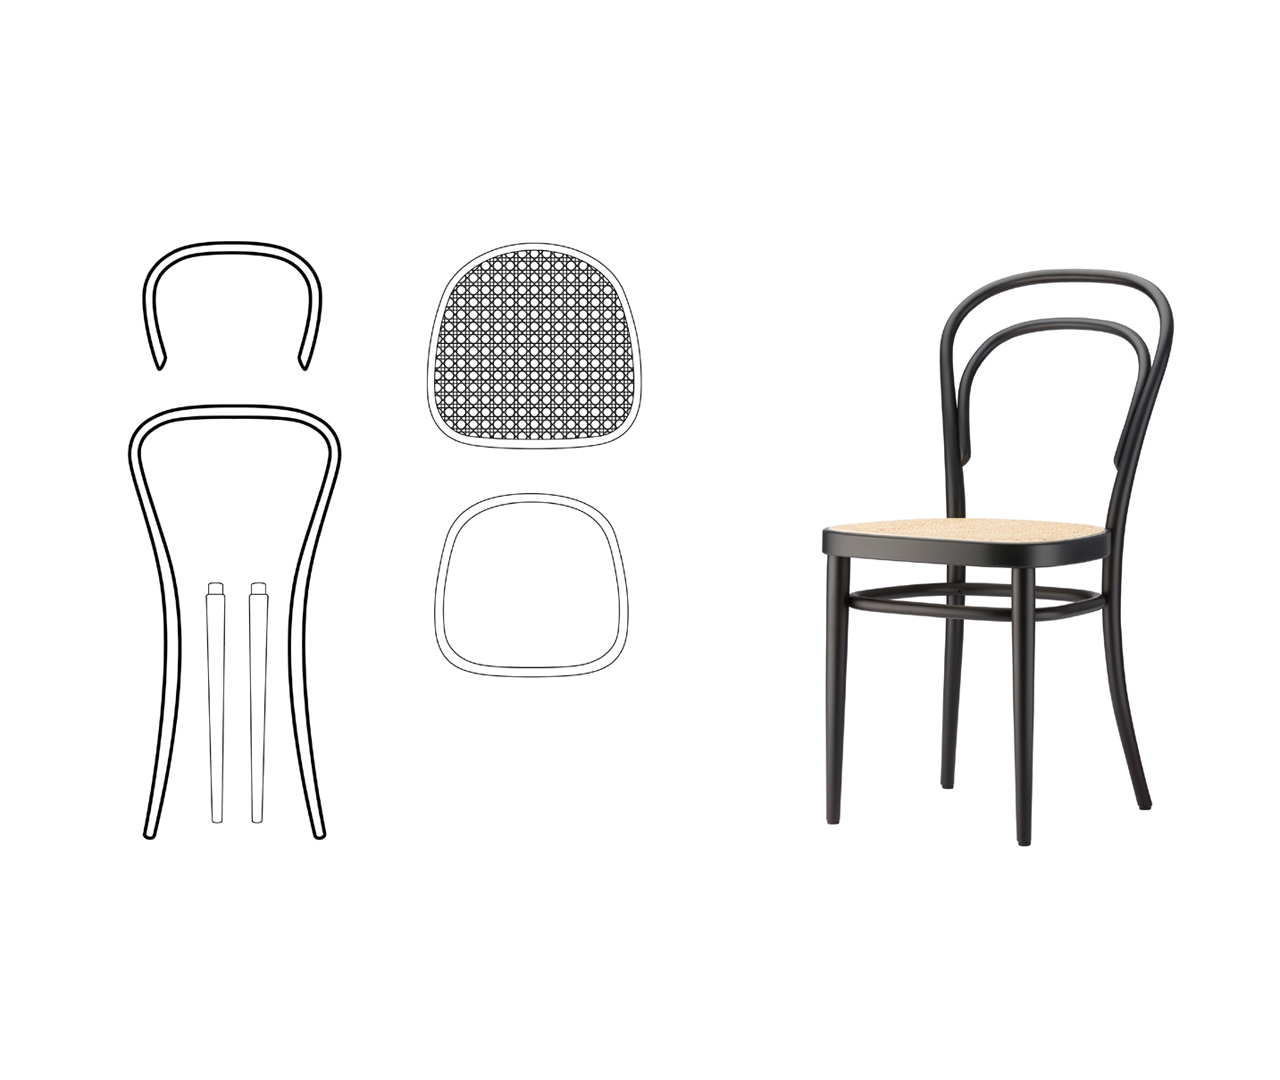 Chair No. 14 from Thonet